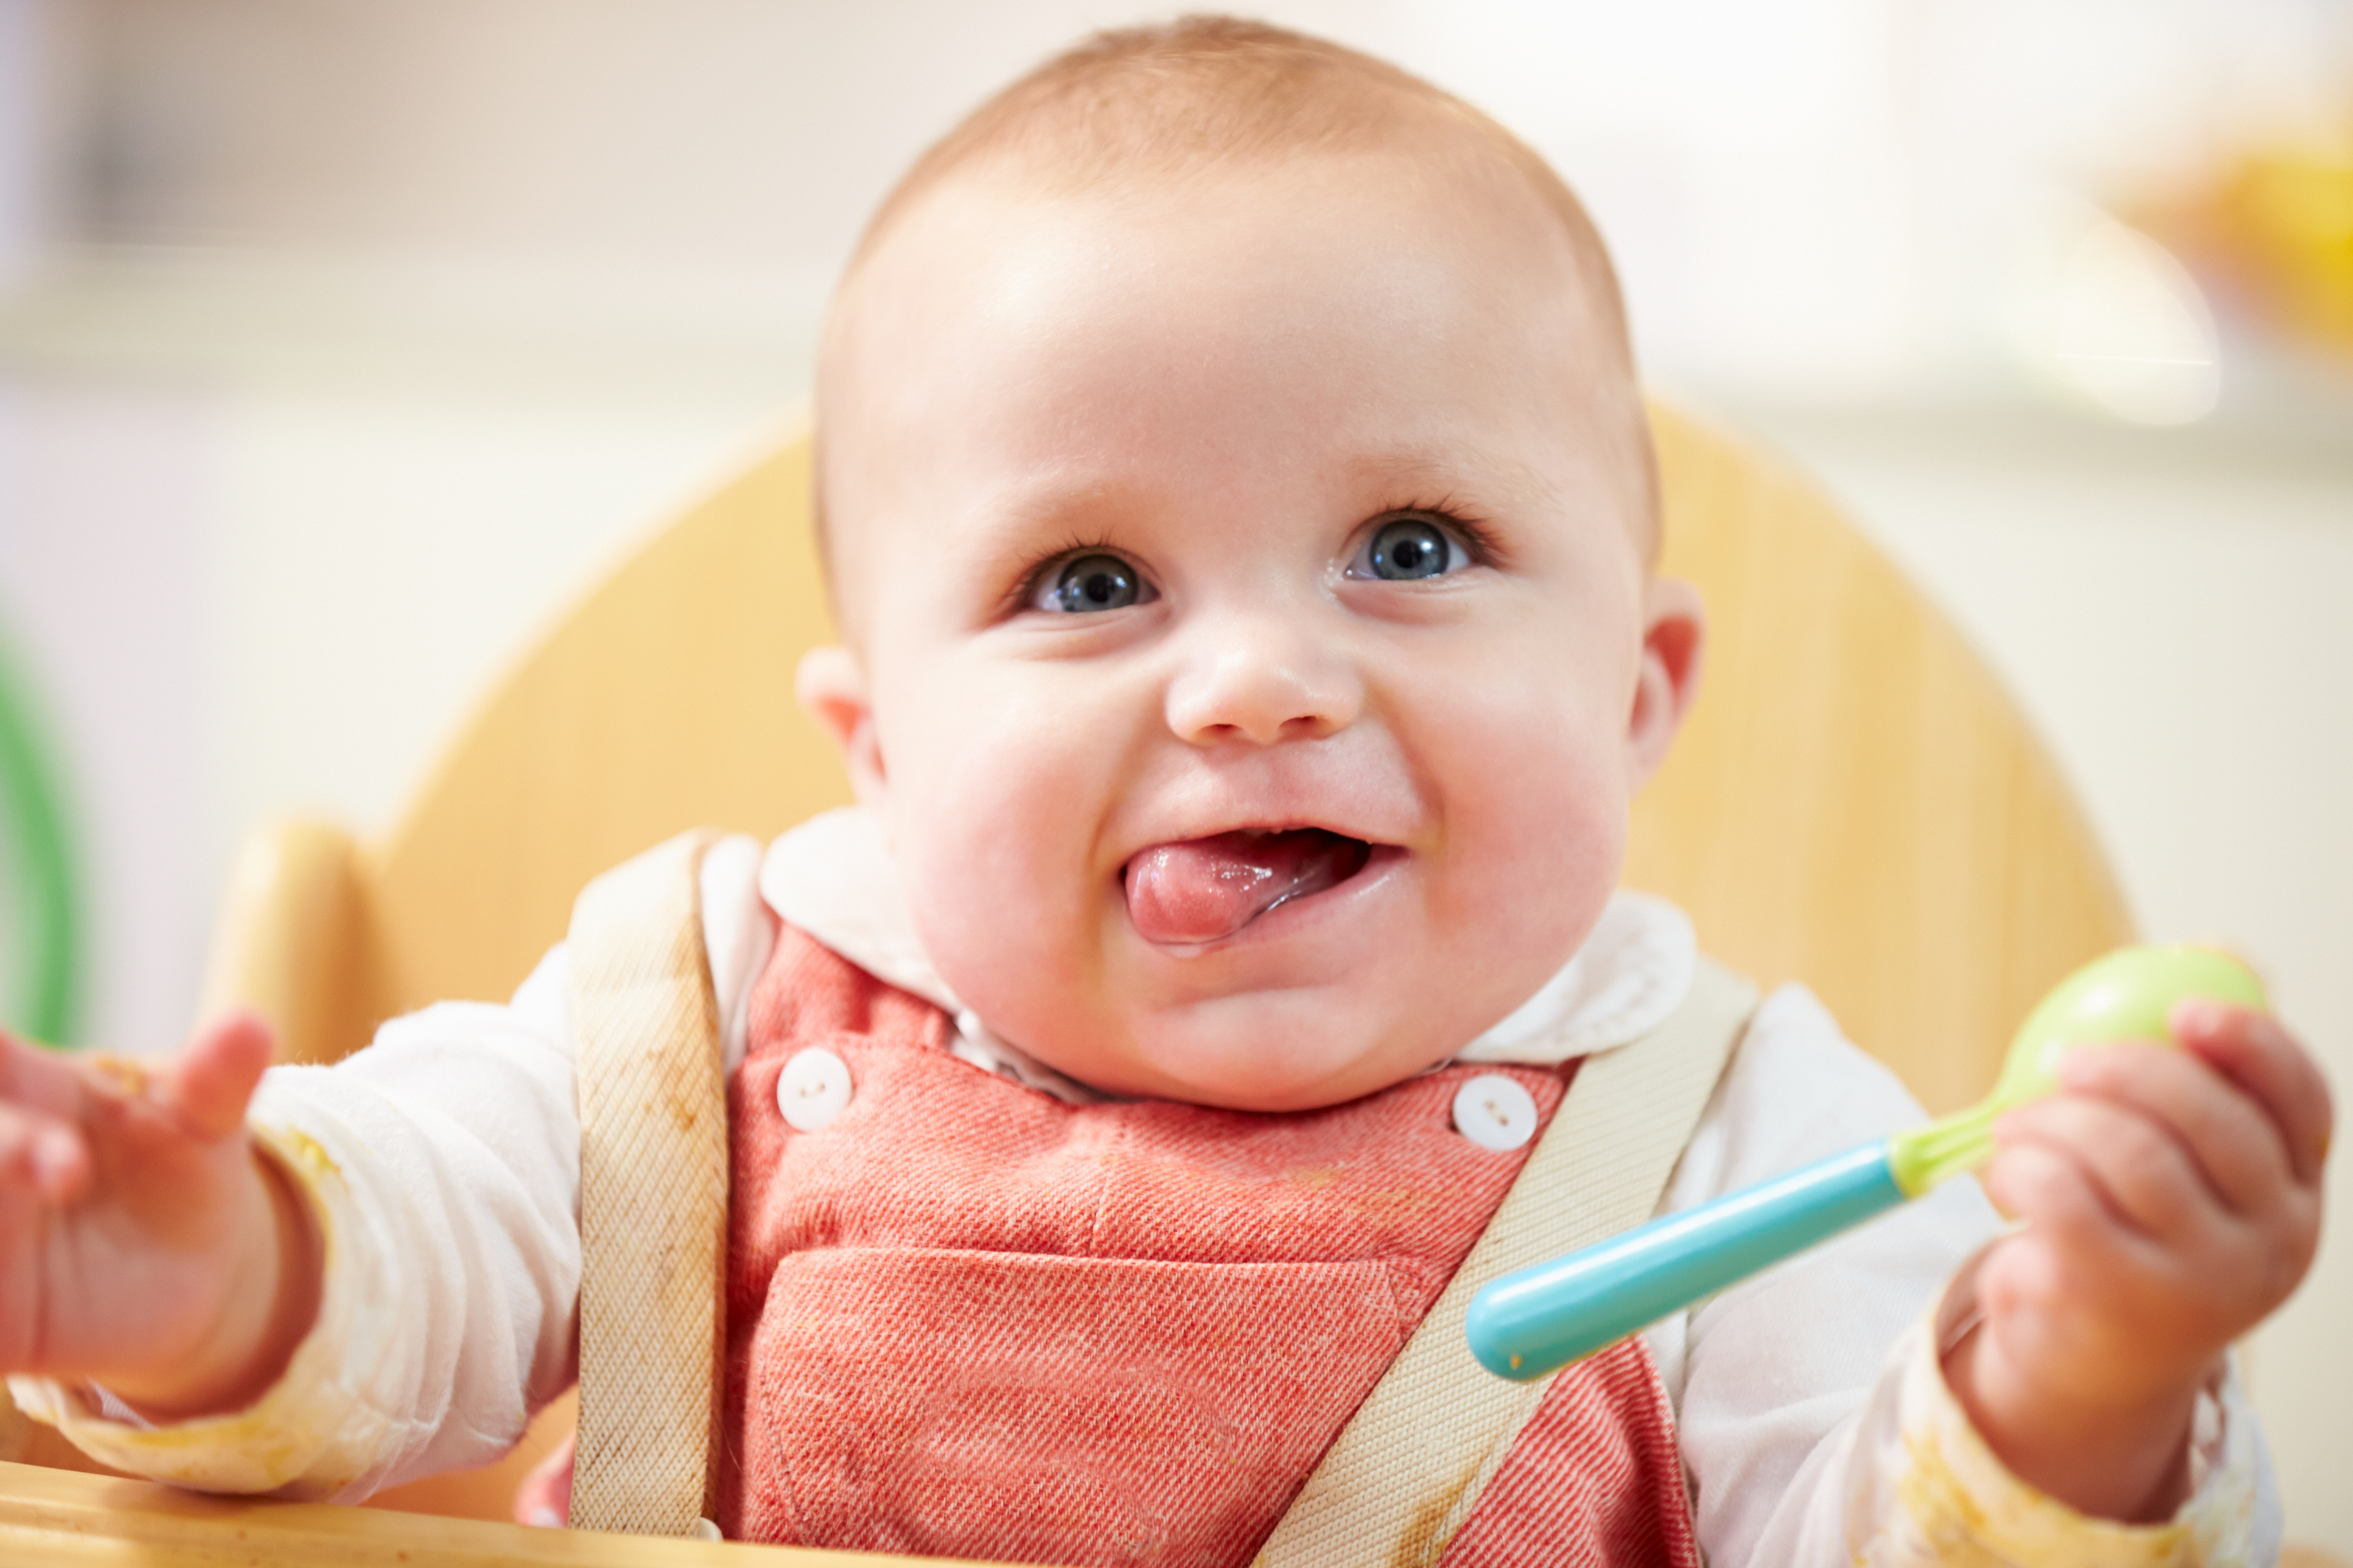 Infant in high chair licking lip ready to eat solids